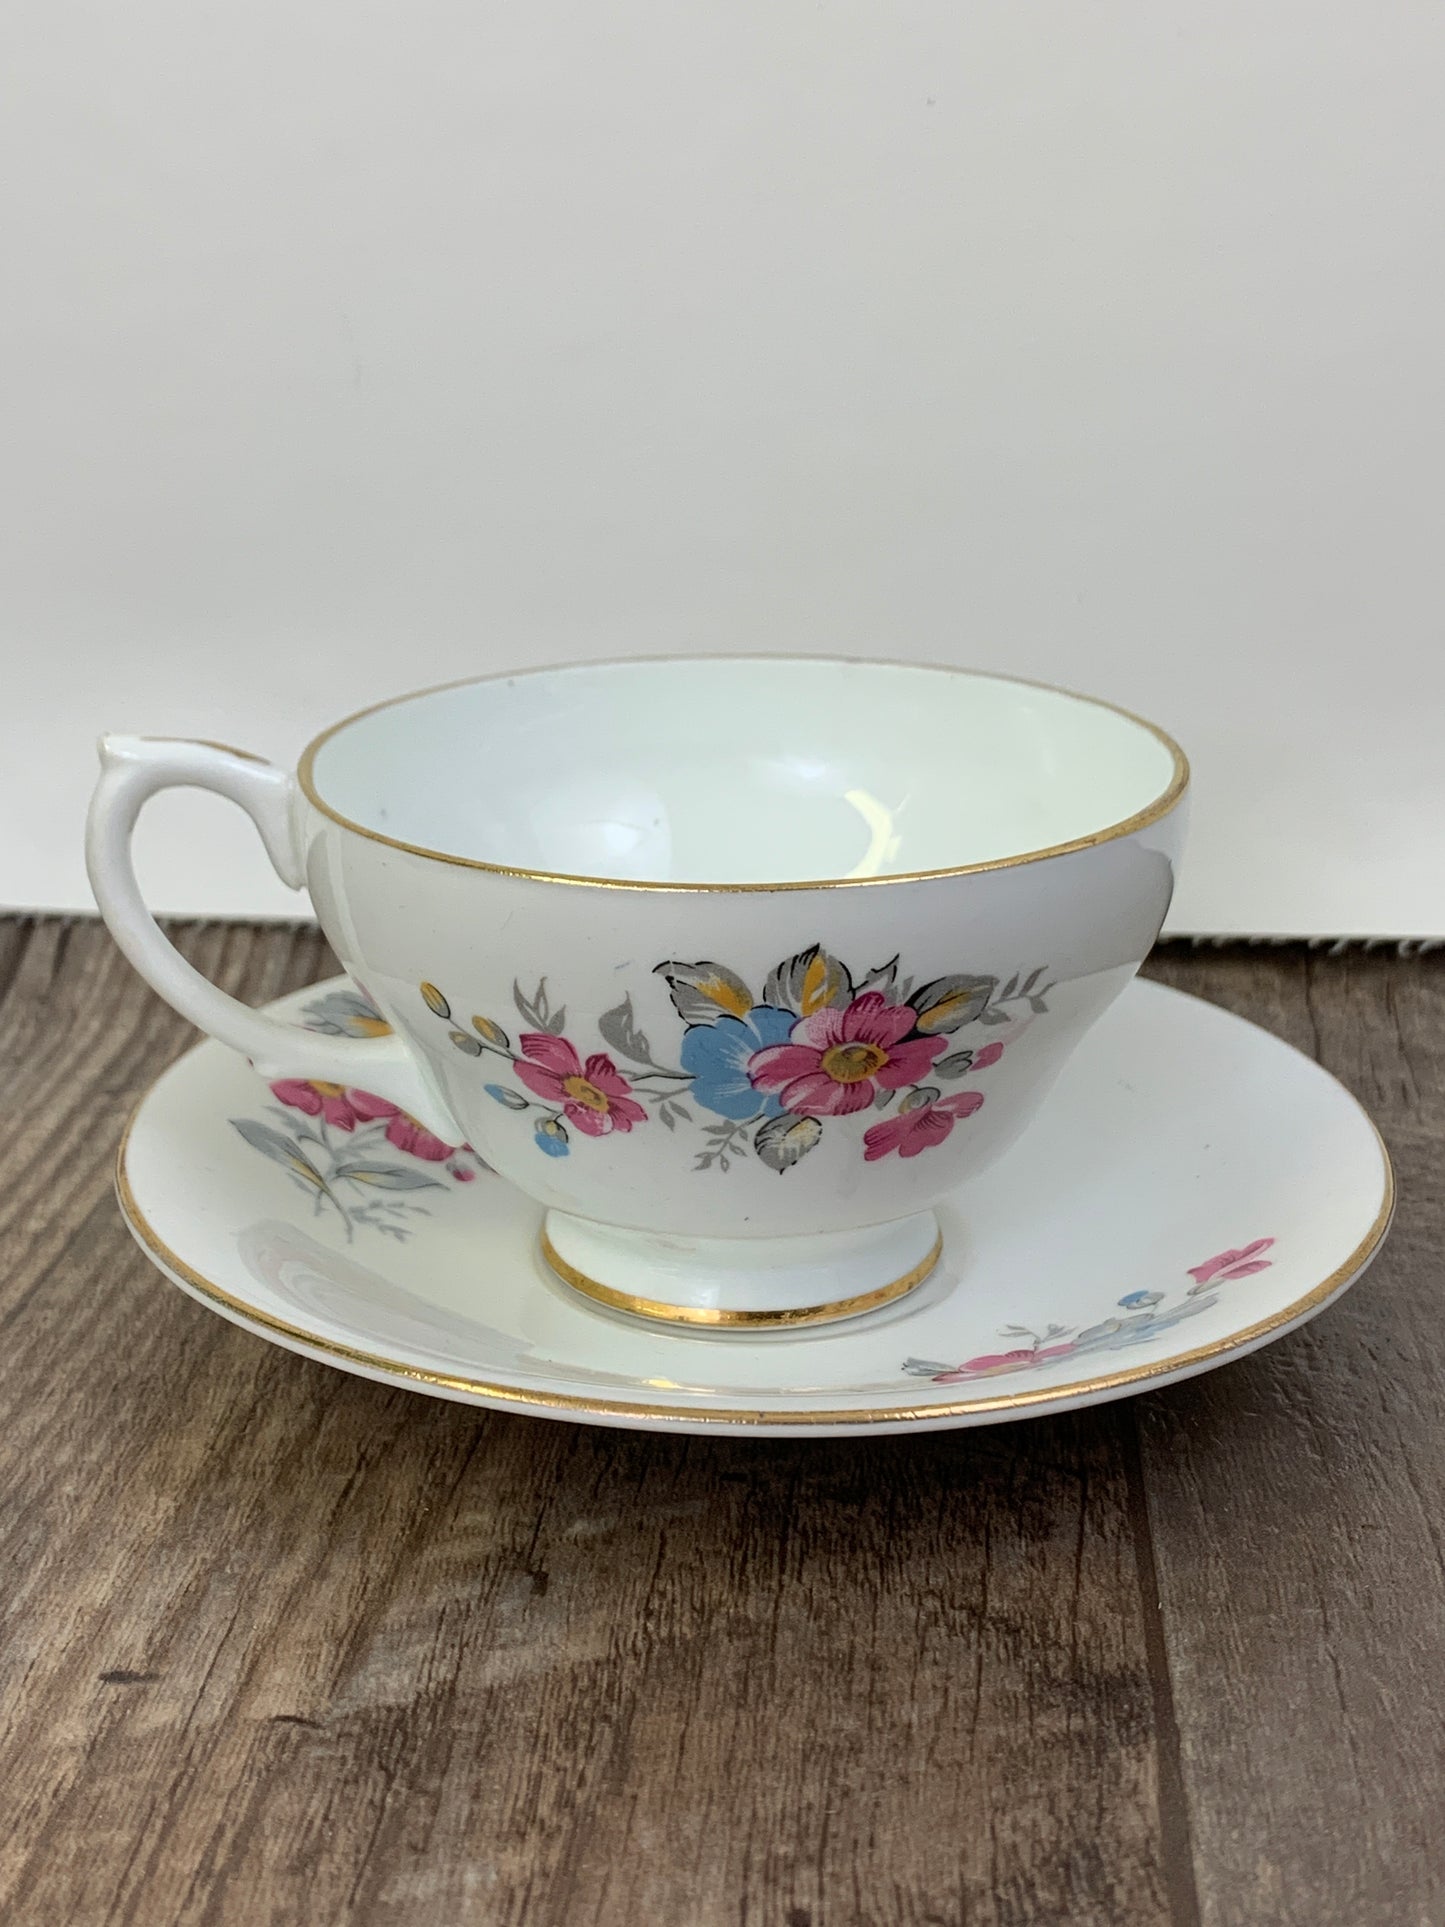 Vintage English Teacup with Pink Floral Pattern